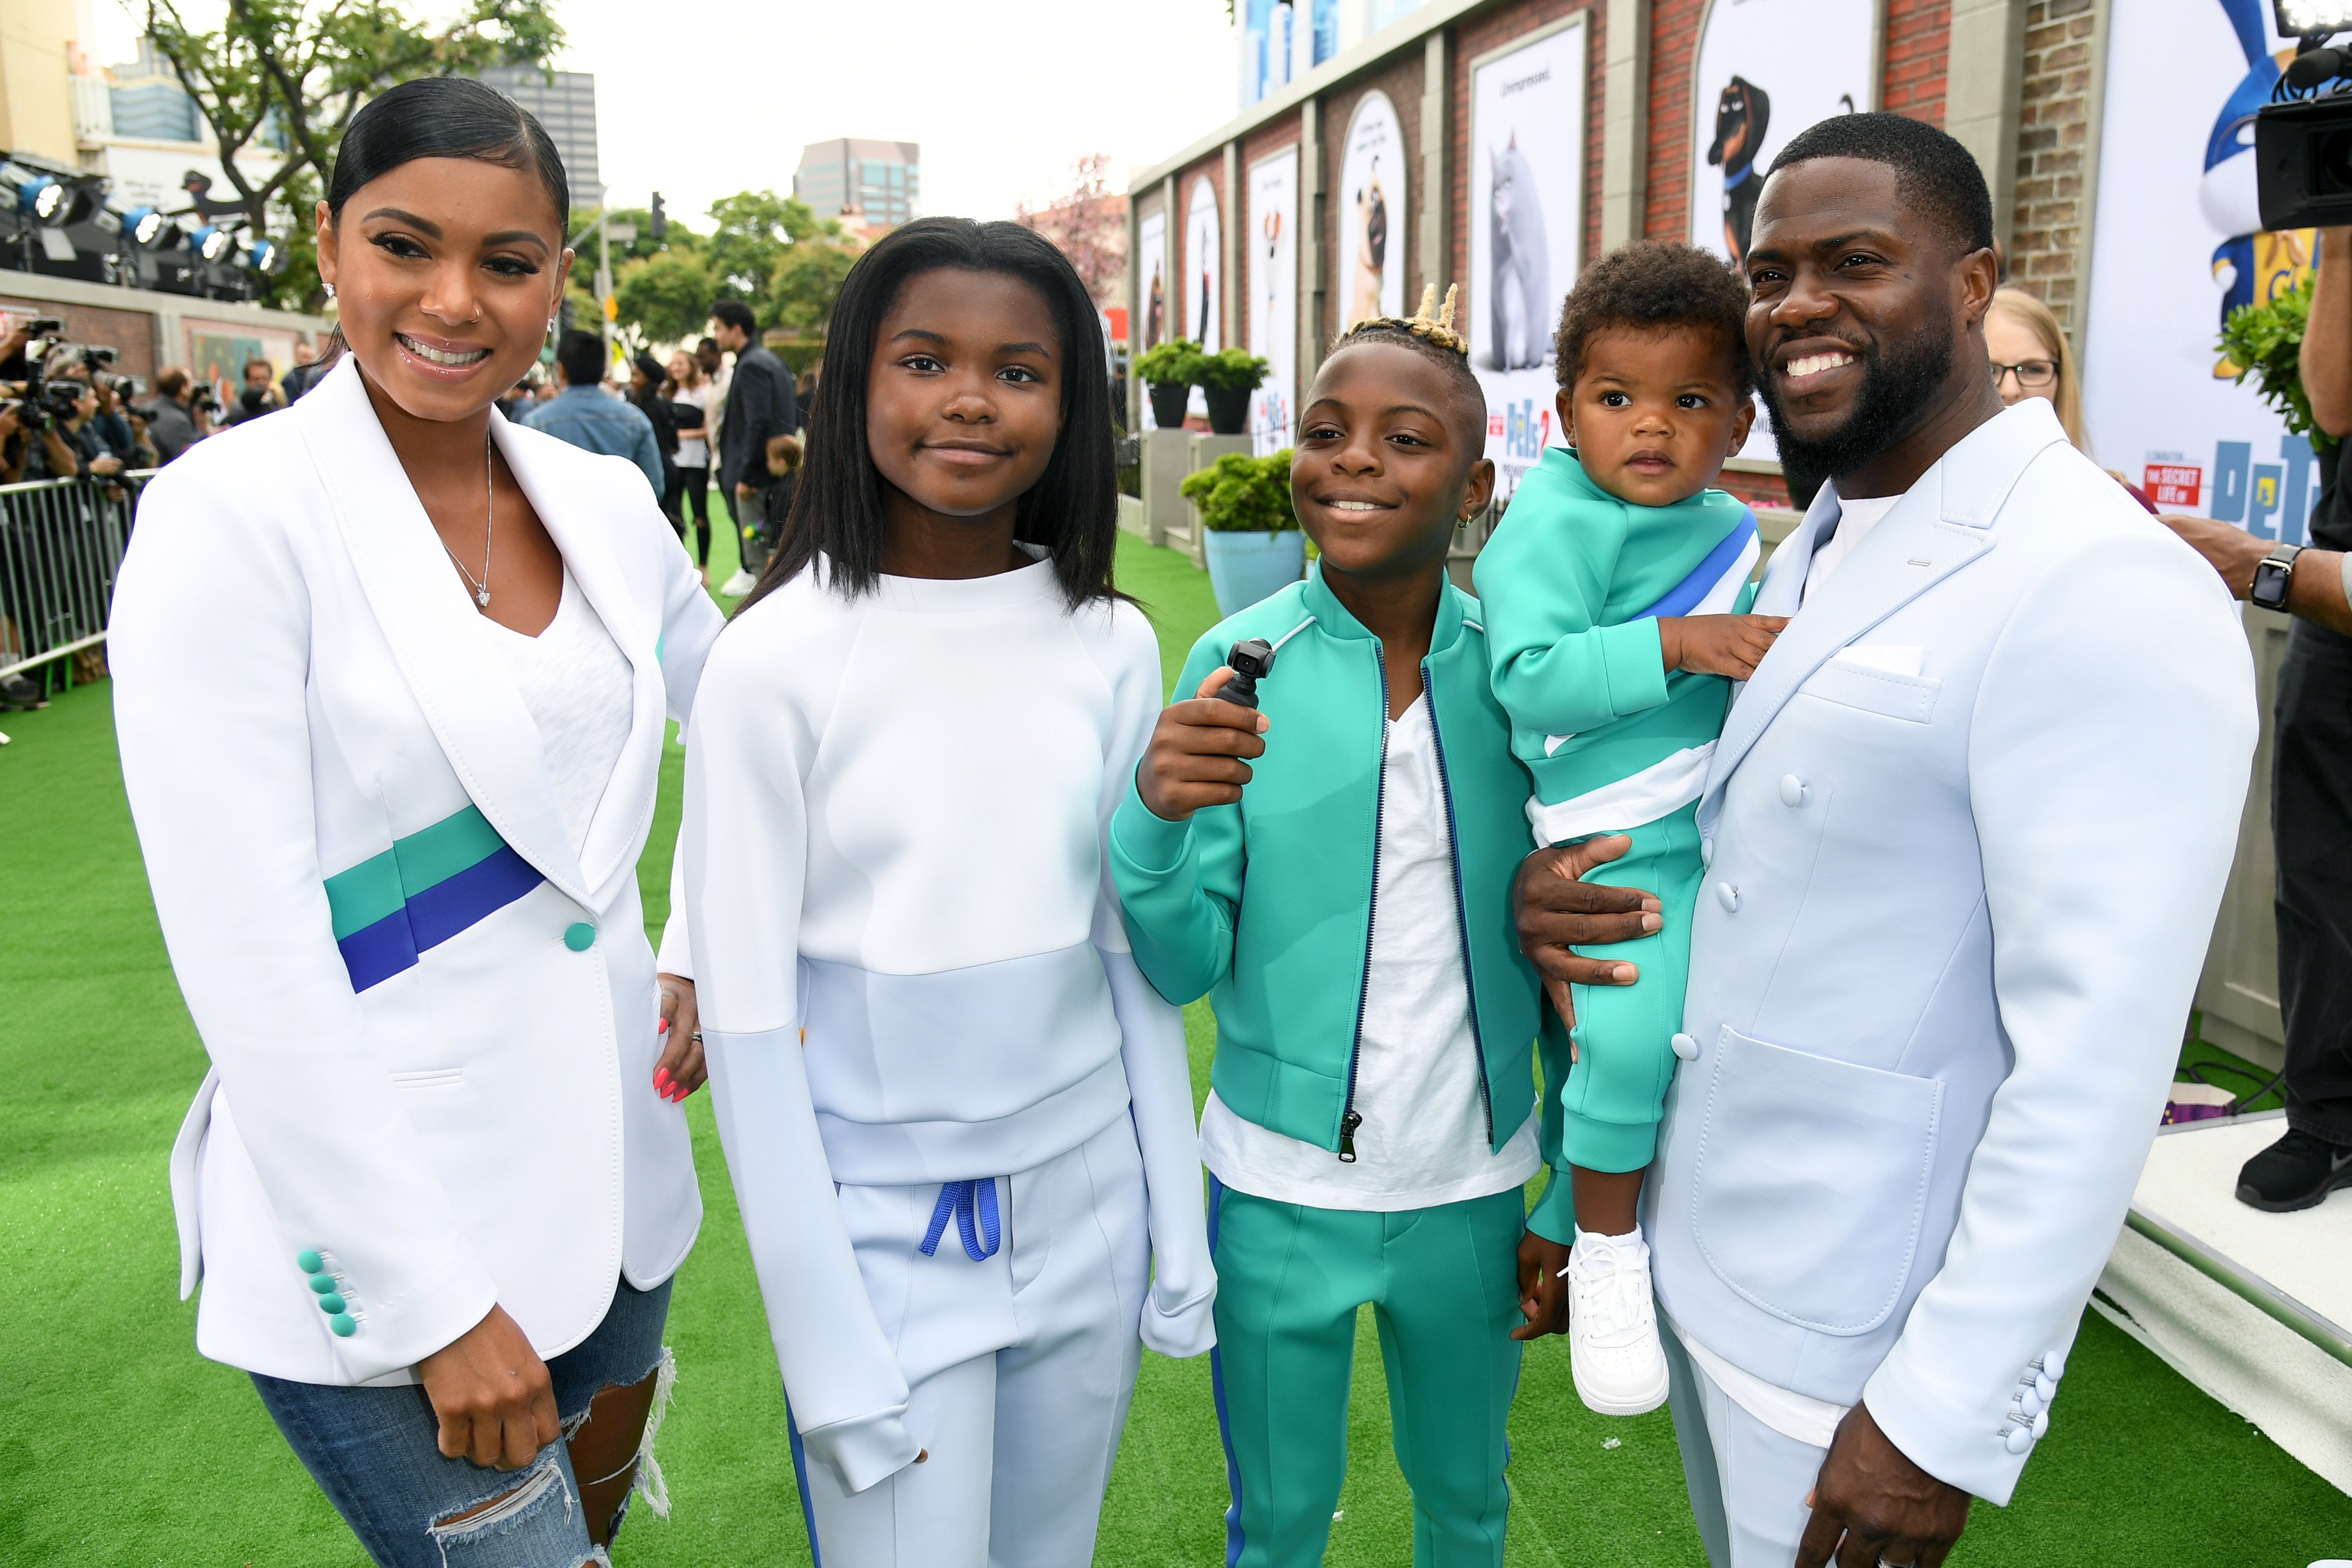 Kevin Hart with his wife Eniko, and children, Heaven, Hendrix, & Kenzo at 'The Secret Life Of Pets 2' Premiere on June 02, 2019 in California | Photo: Getty Images